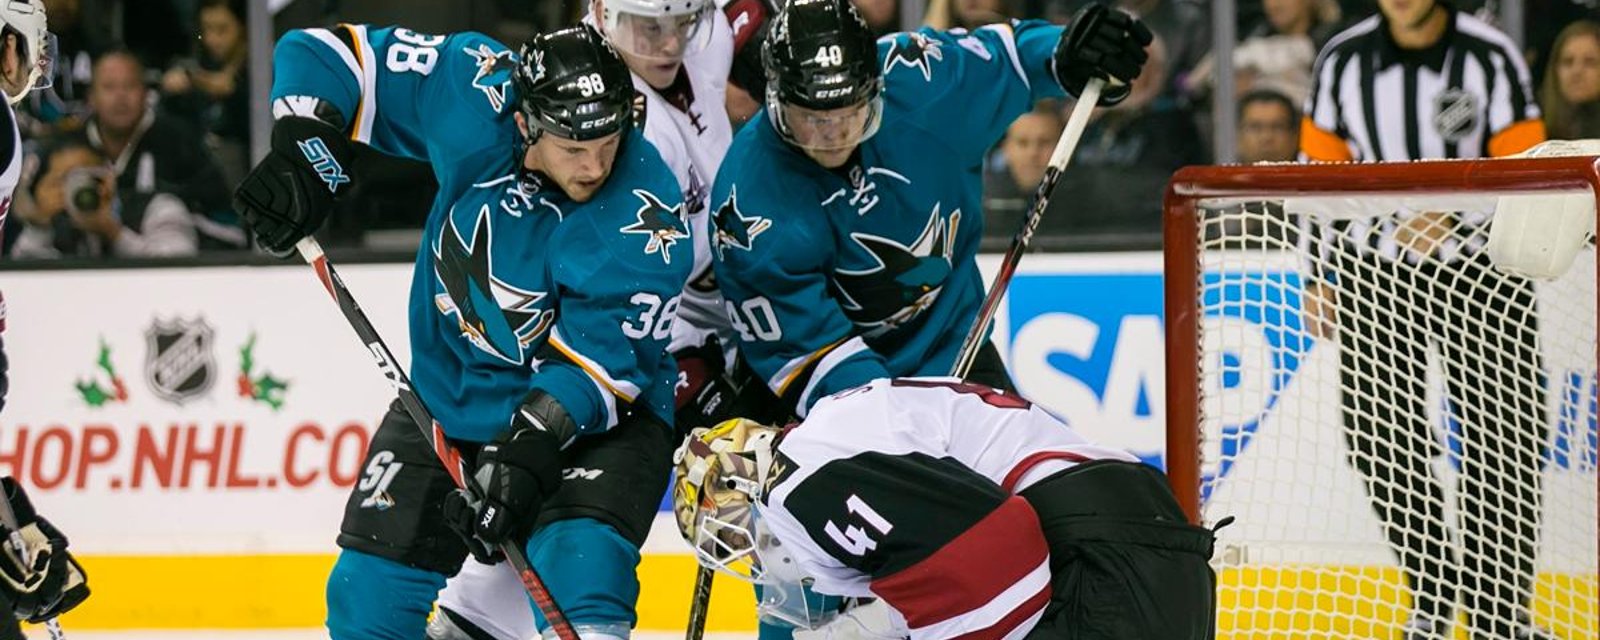 Sharks sign 3 NHL ready players. 